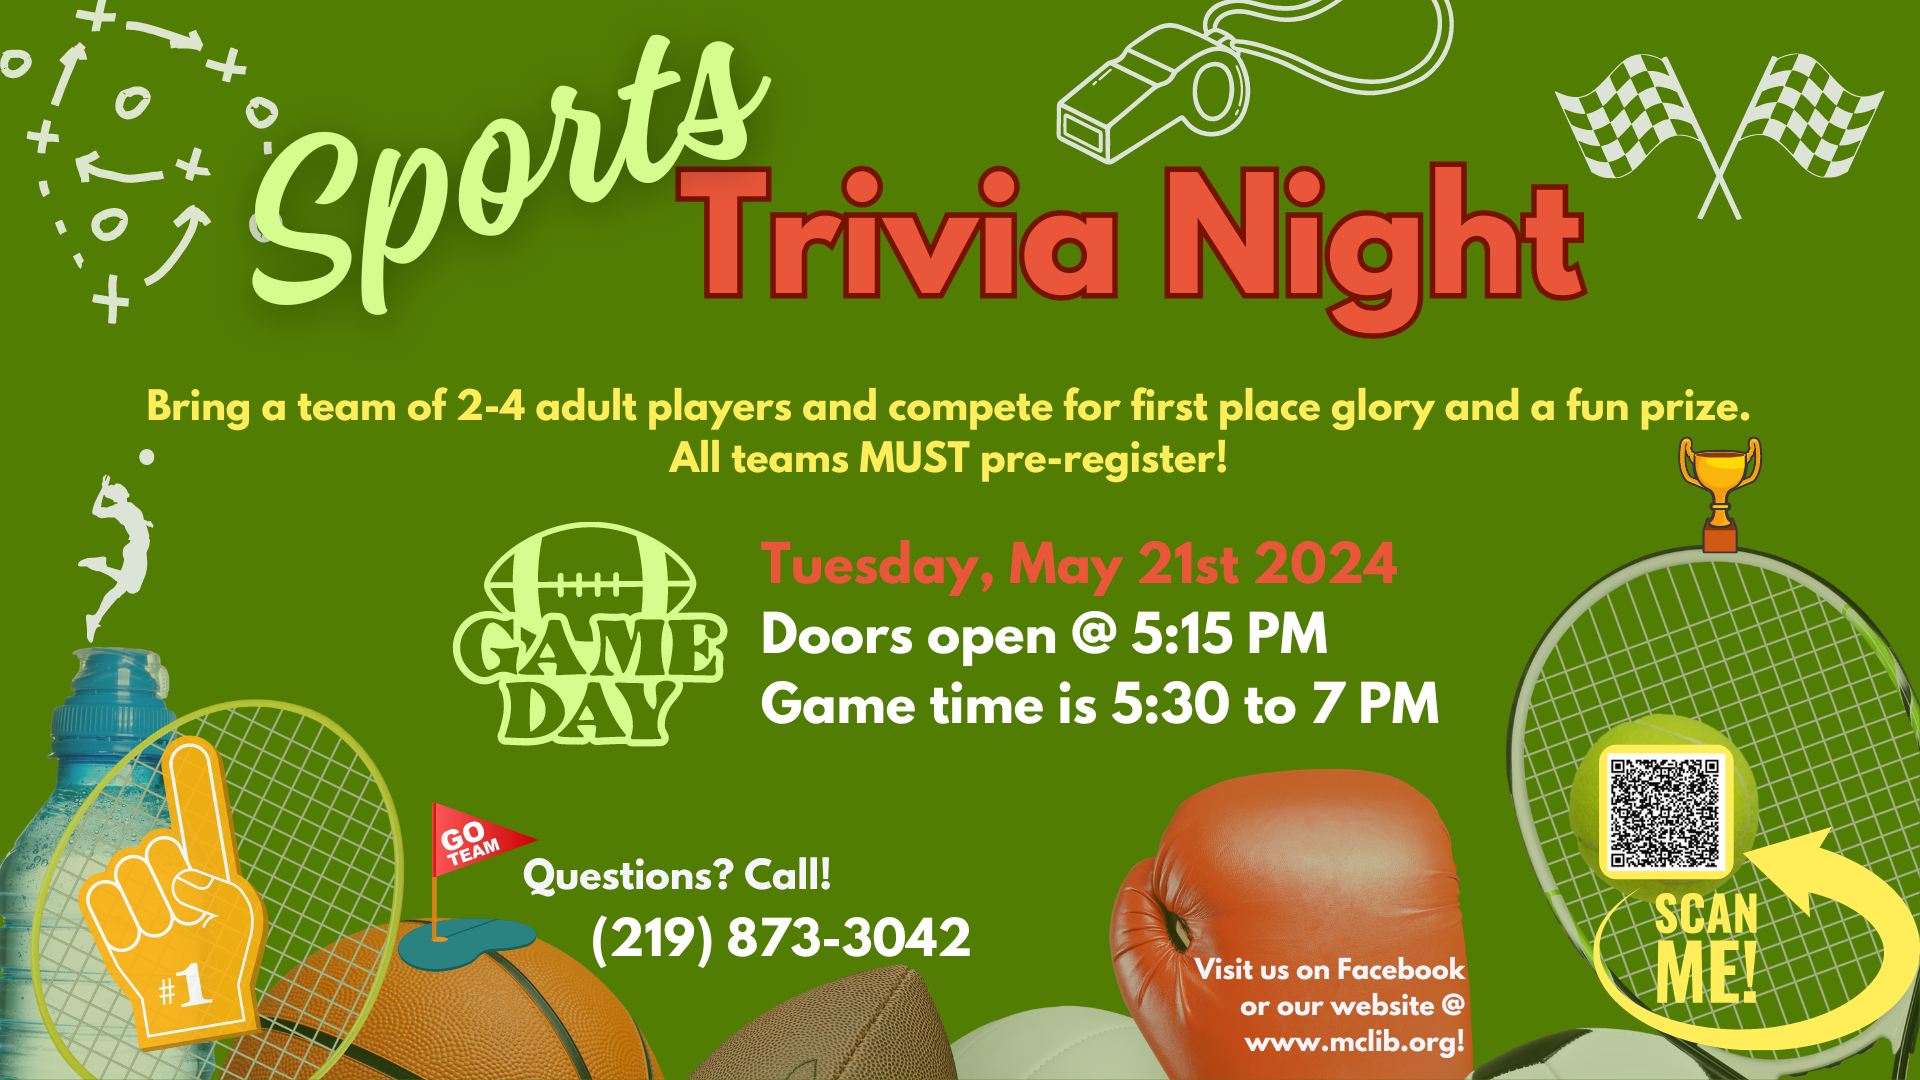 Sports trivia night for adults, Tuesday, may 14 at 5:15 pm, pre-registration required